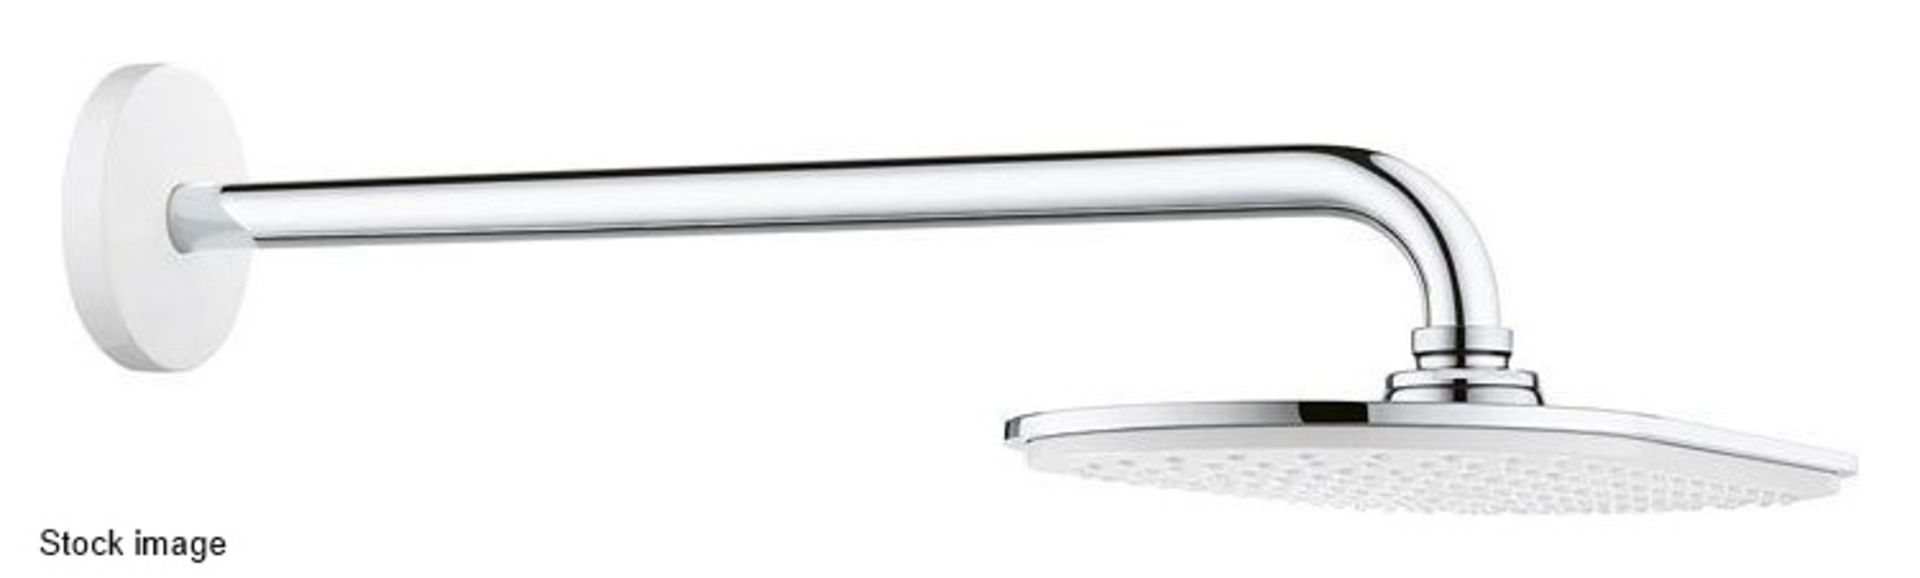 1 x GROHE 'Veris' Head Shower Wall-Mounted Head & Arm 450 Gr - Ref: 26170LS0 - New & Boxed Stock -